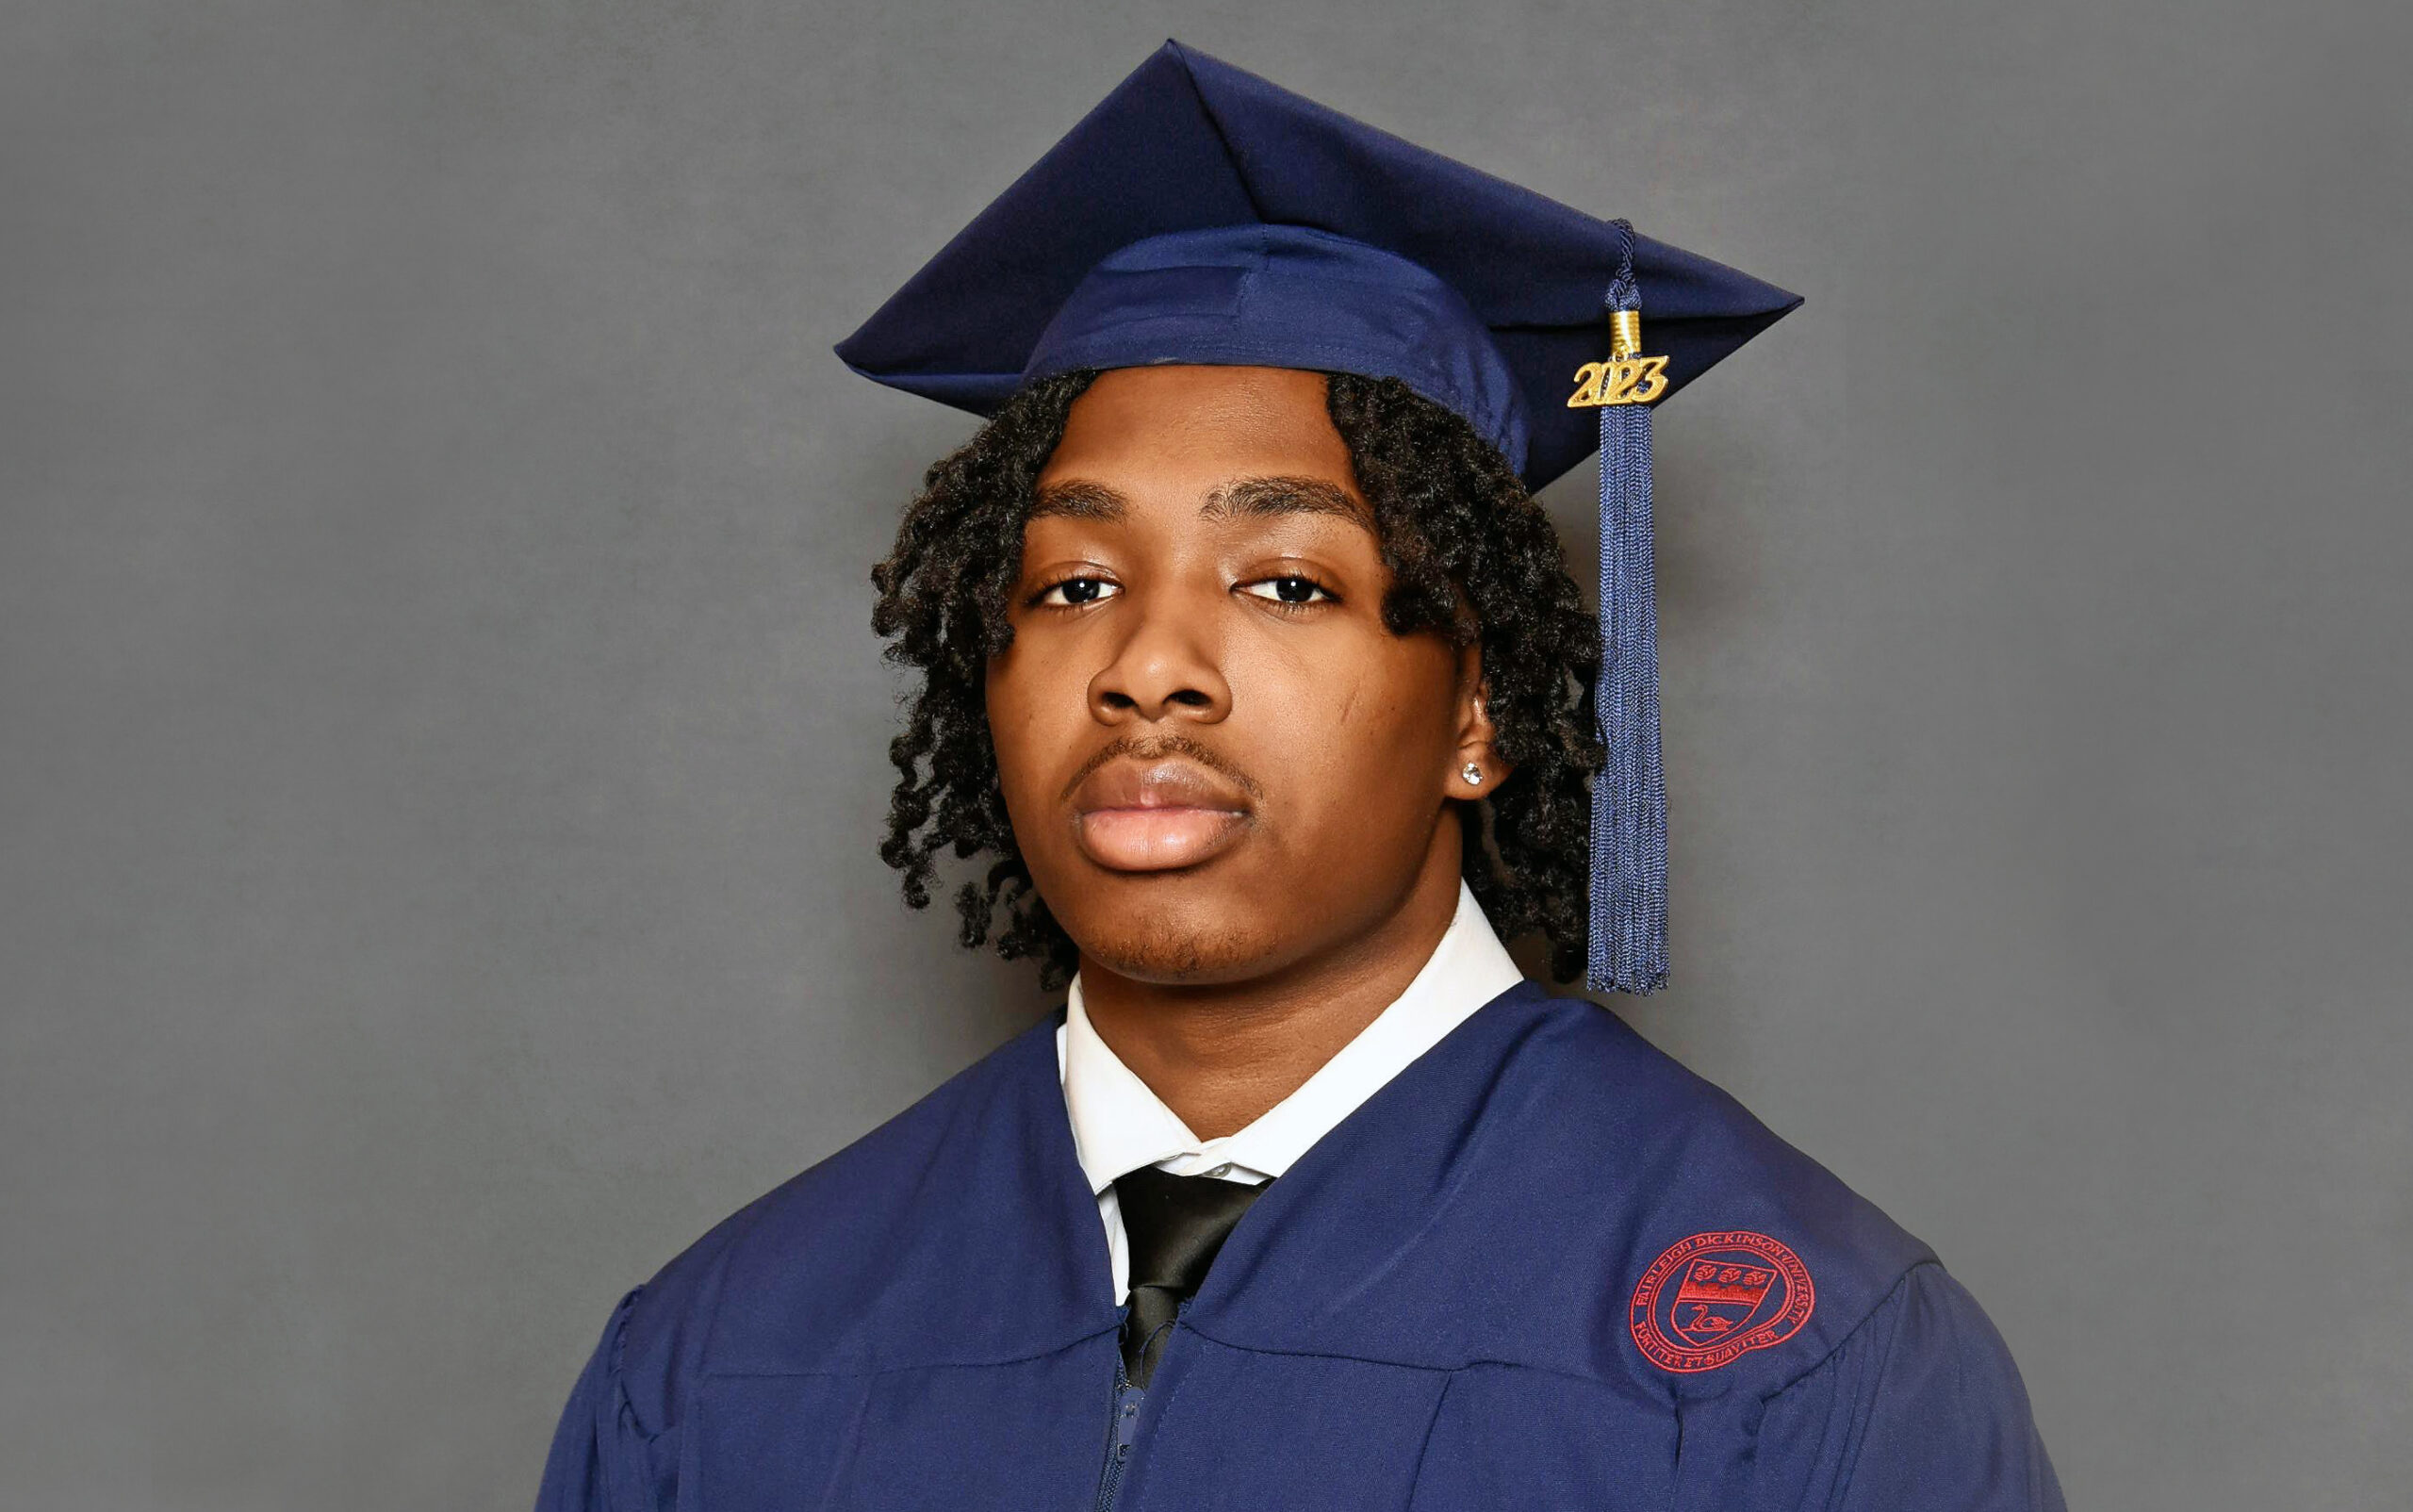 Portrait of a young man wearing a graduation cap and gown.